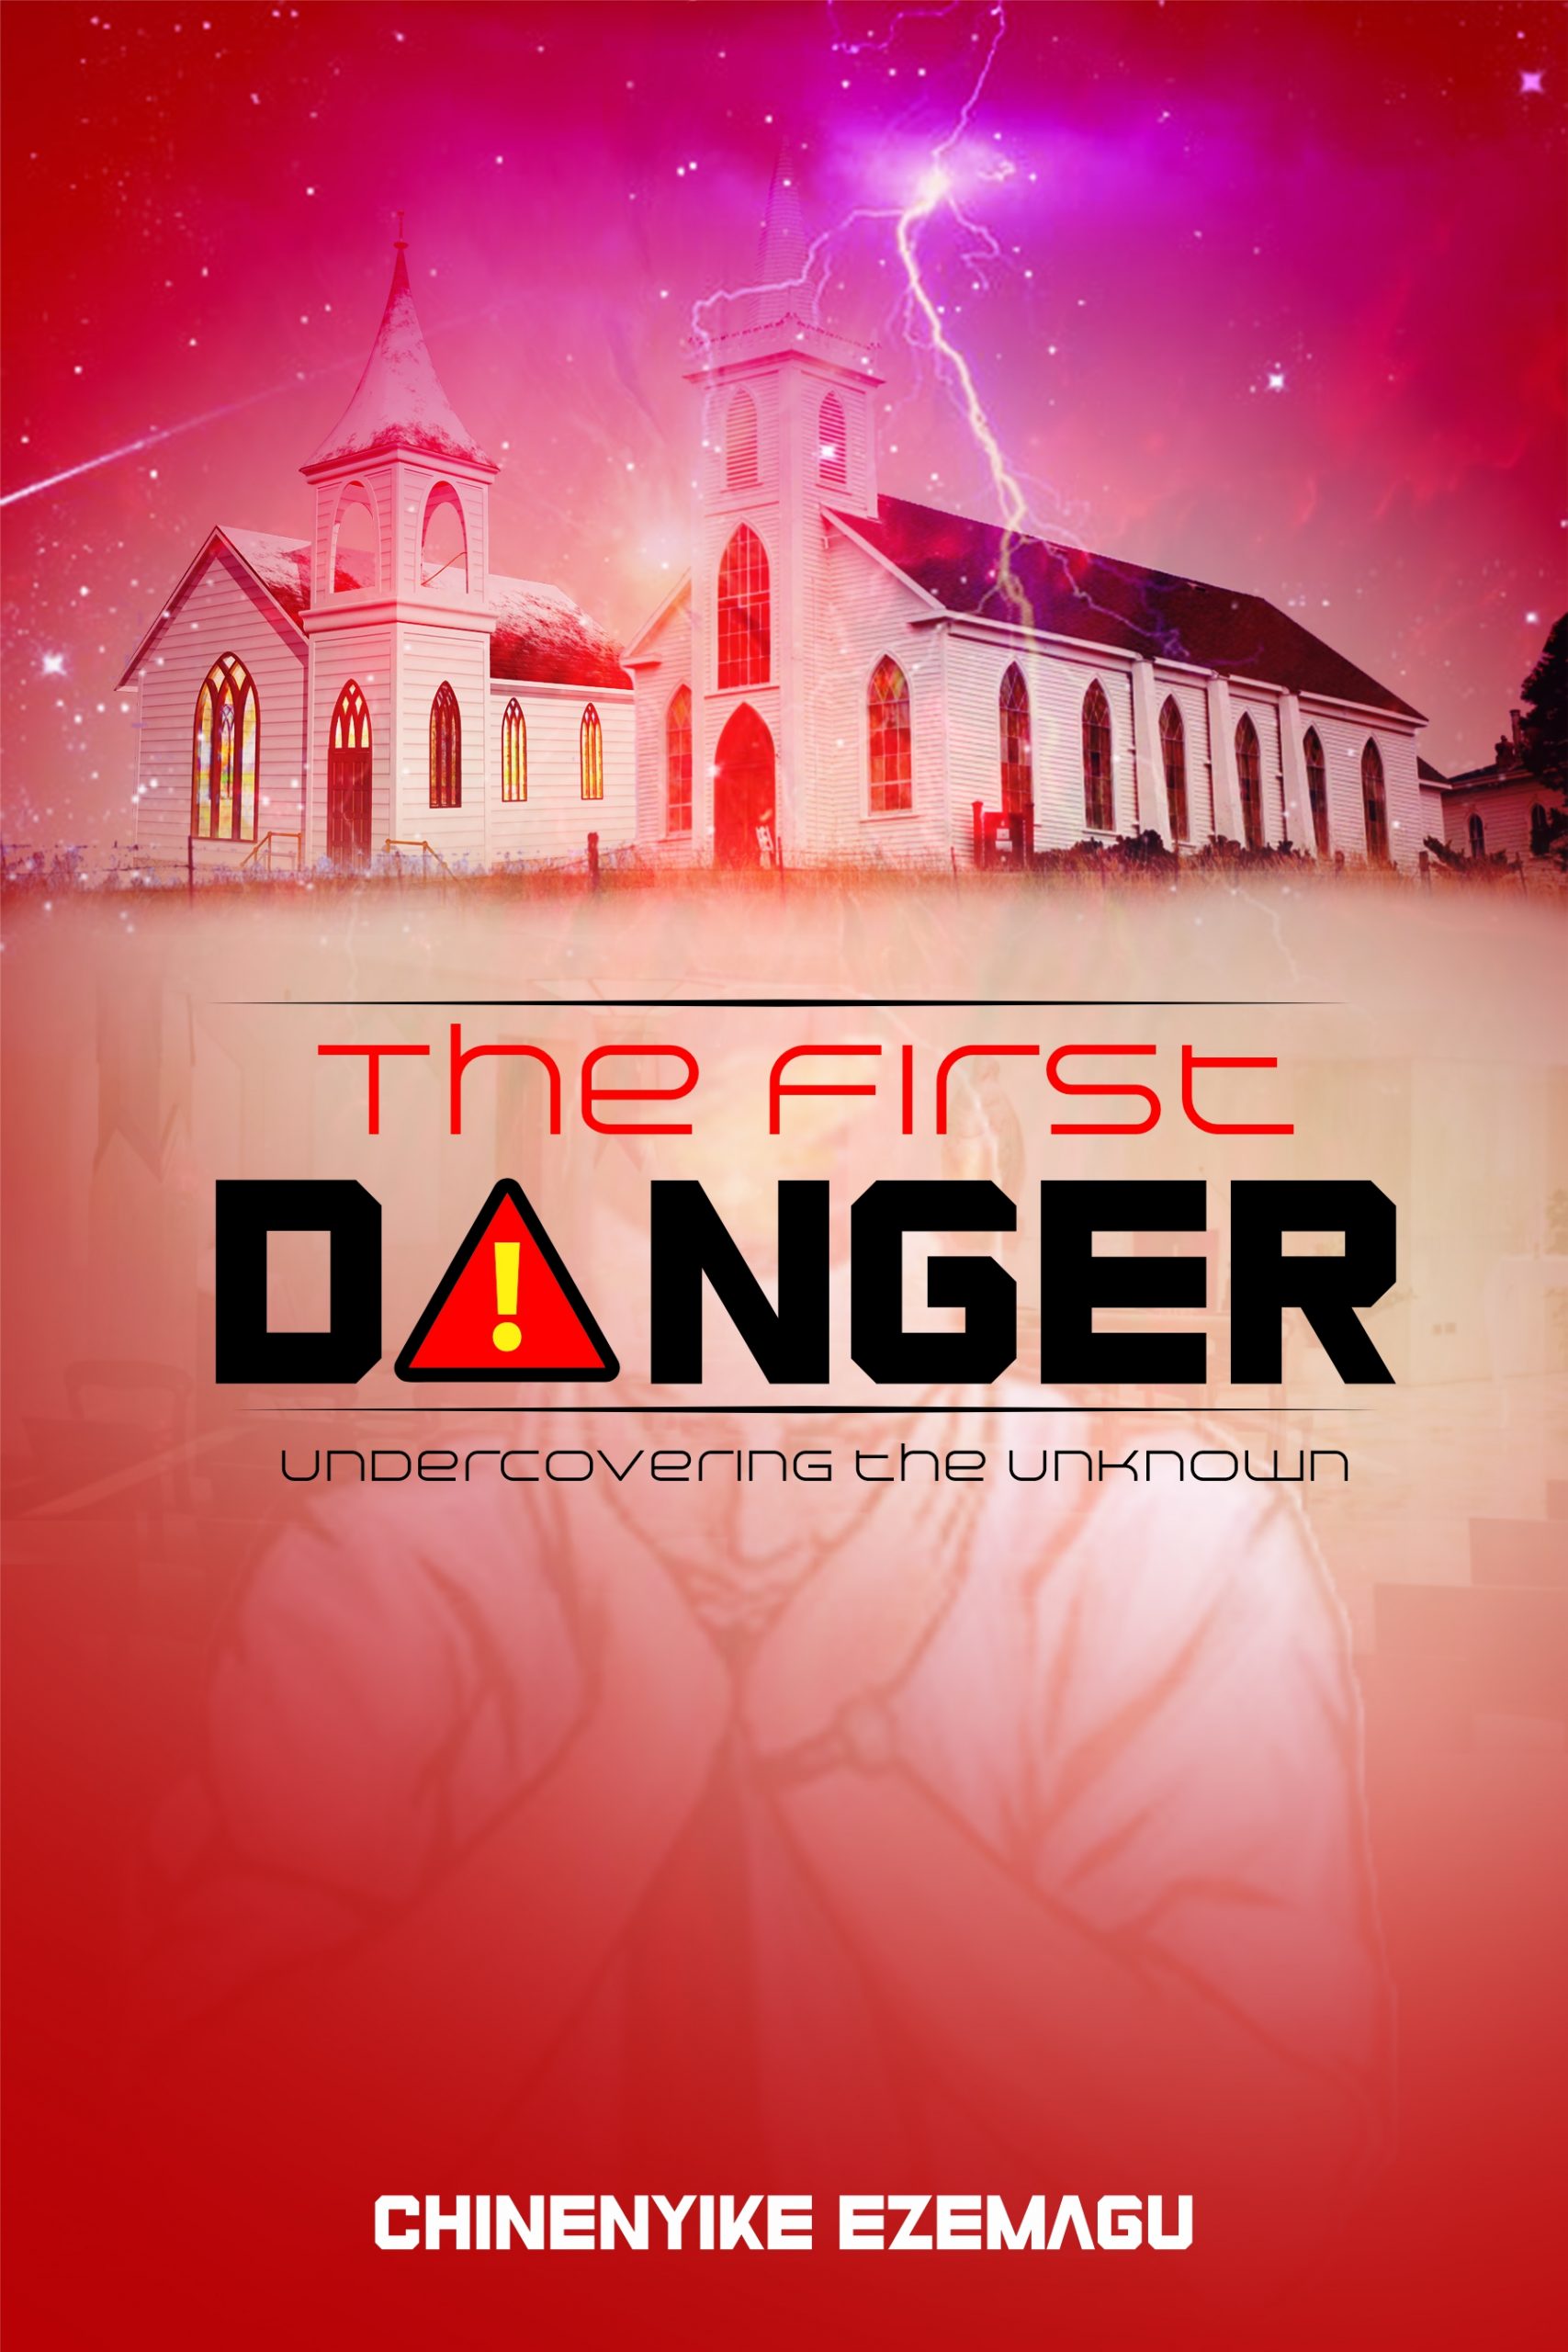 The First Danger - Cover design